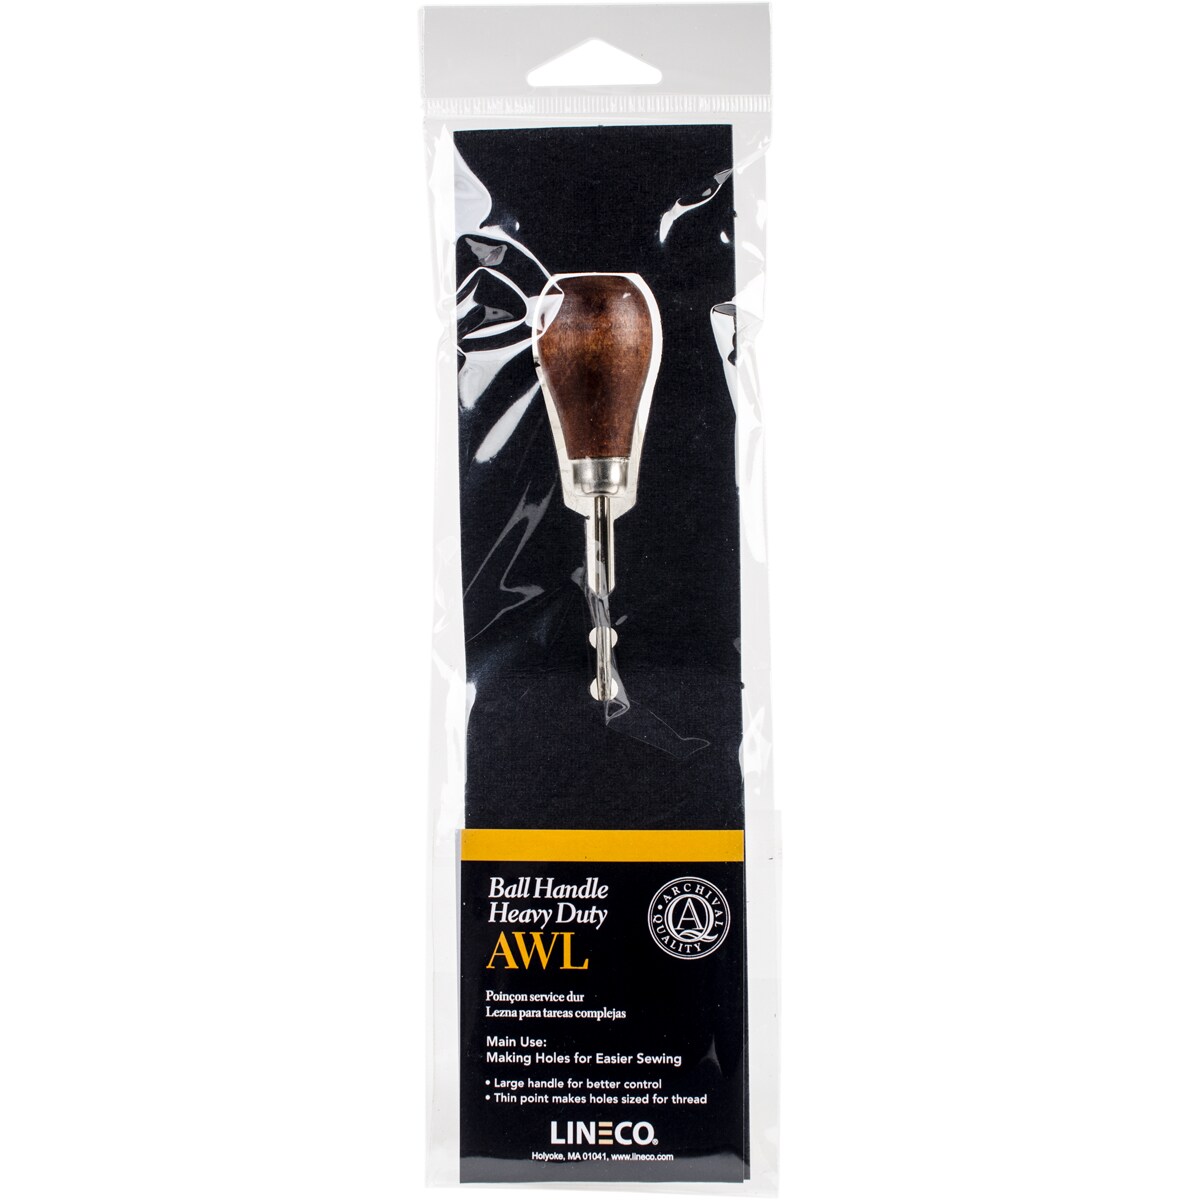 Lineco Awl Heavy Duty-Large Point W/Wooden Ball Handle